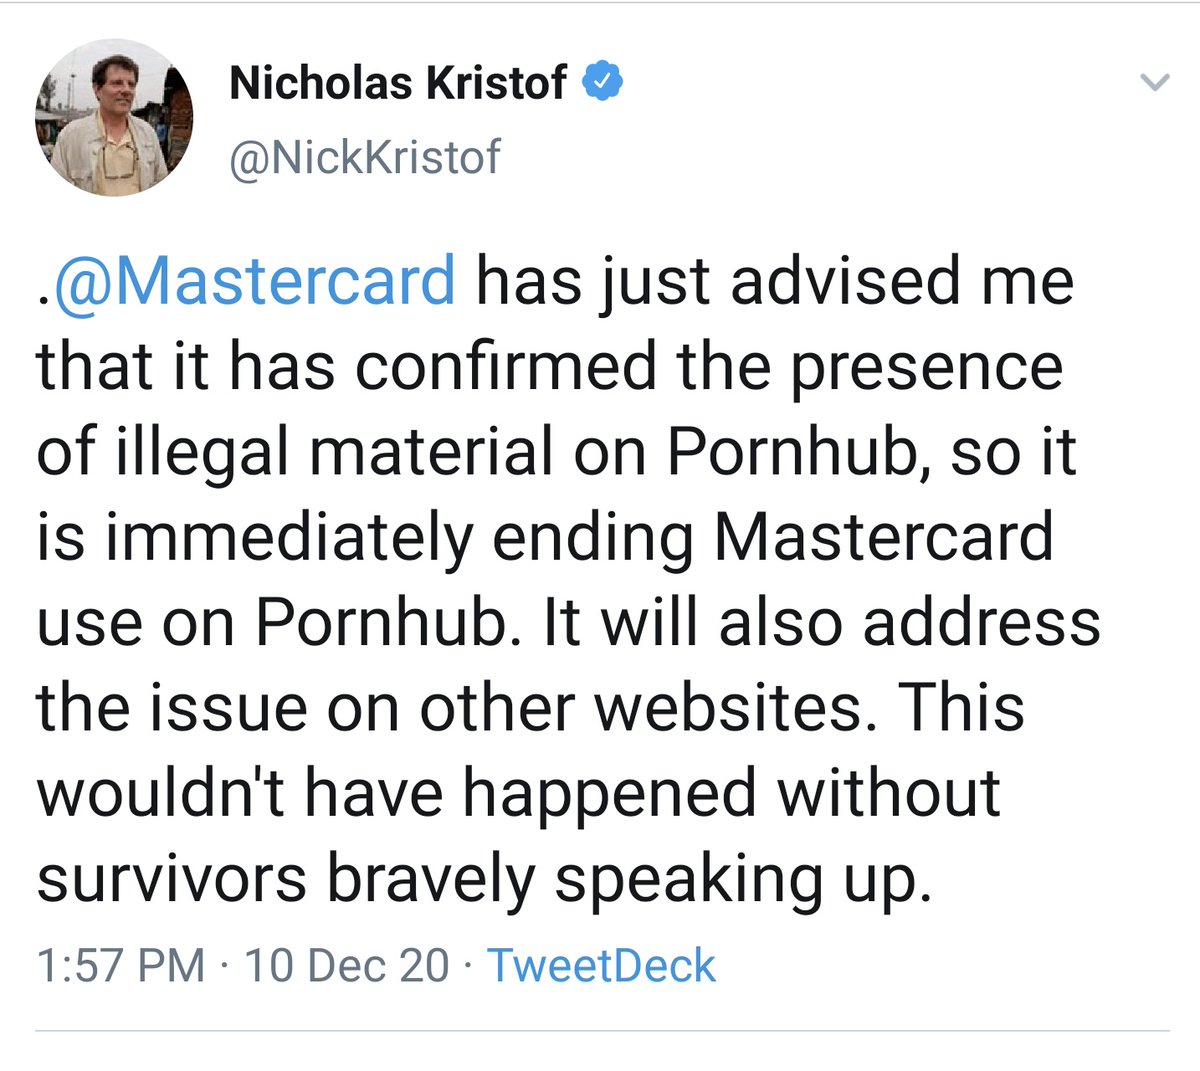 make no mistake: the Mastercard ban isn't about sexual abuse. if it were, Kristof would be going after the bigger source of child pornography: Facebook.